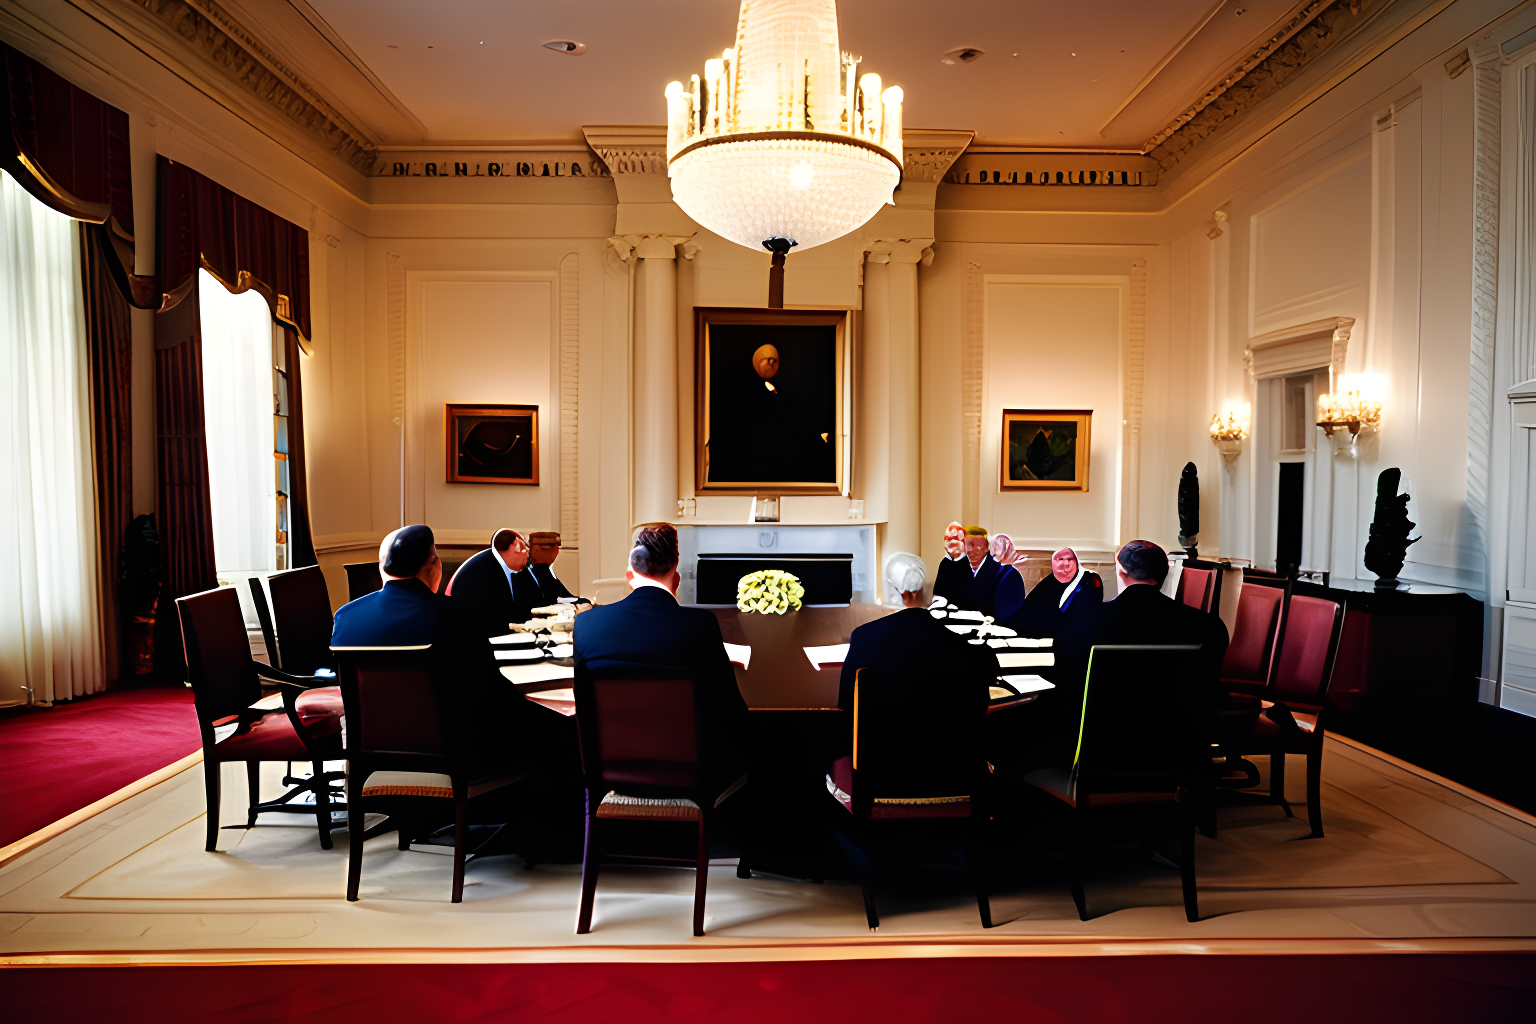 a meeting room, filled with dignitaries, in the United States White house